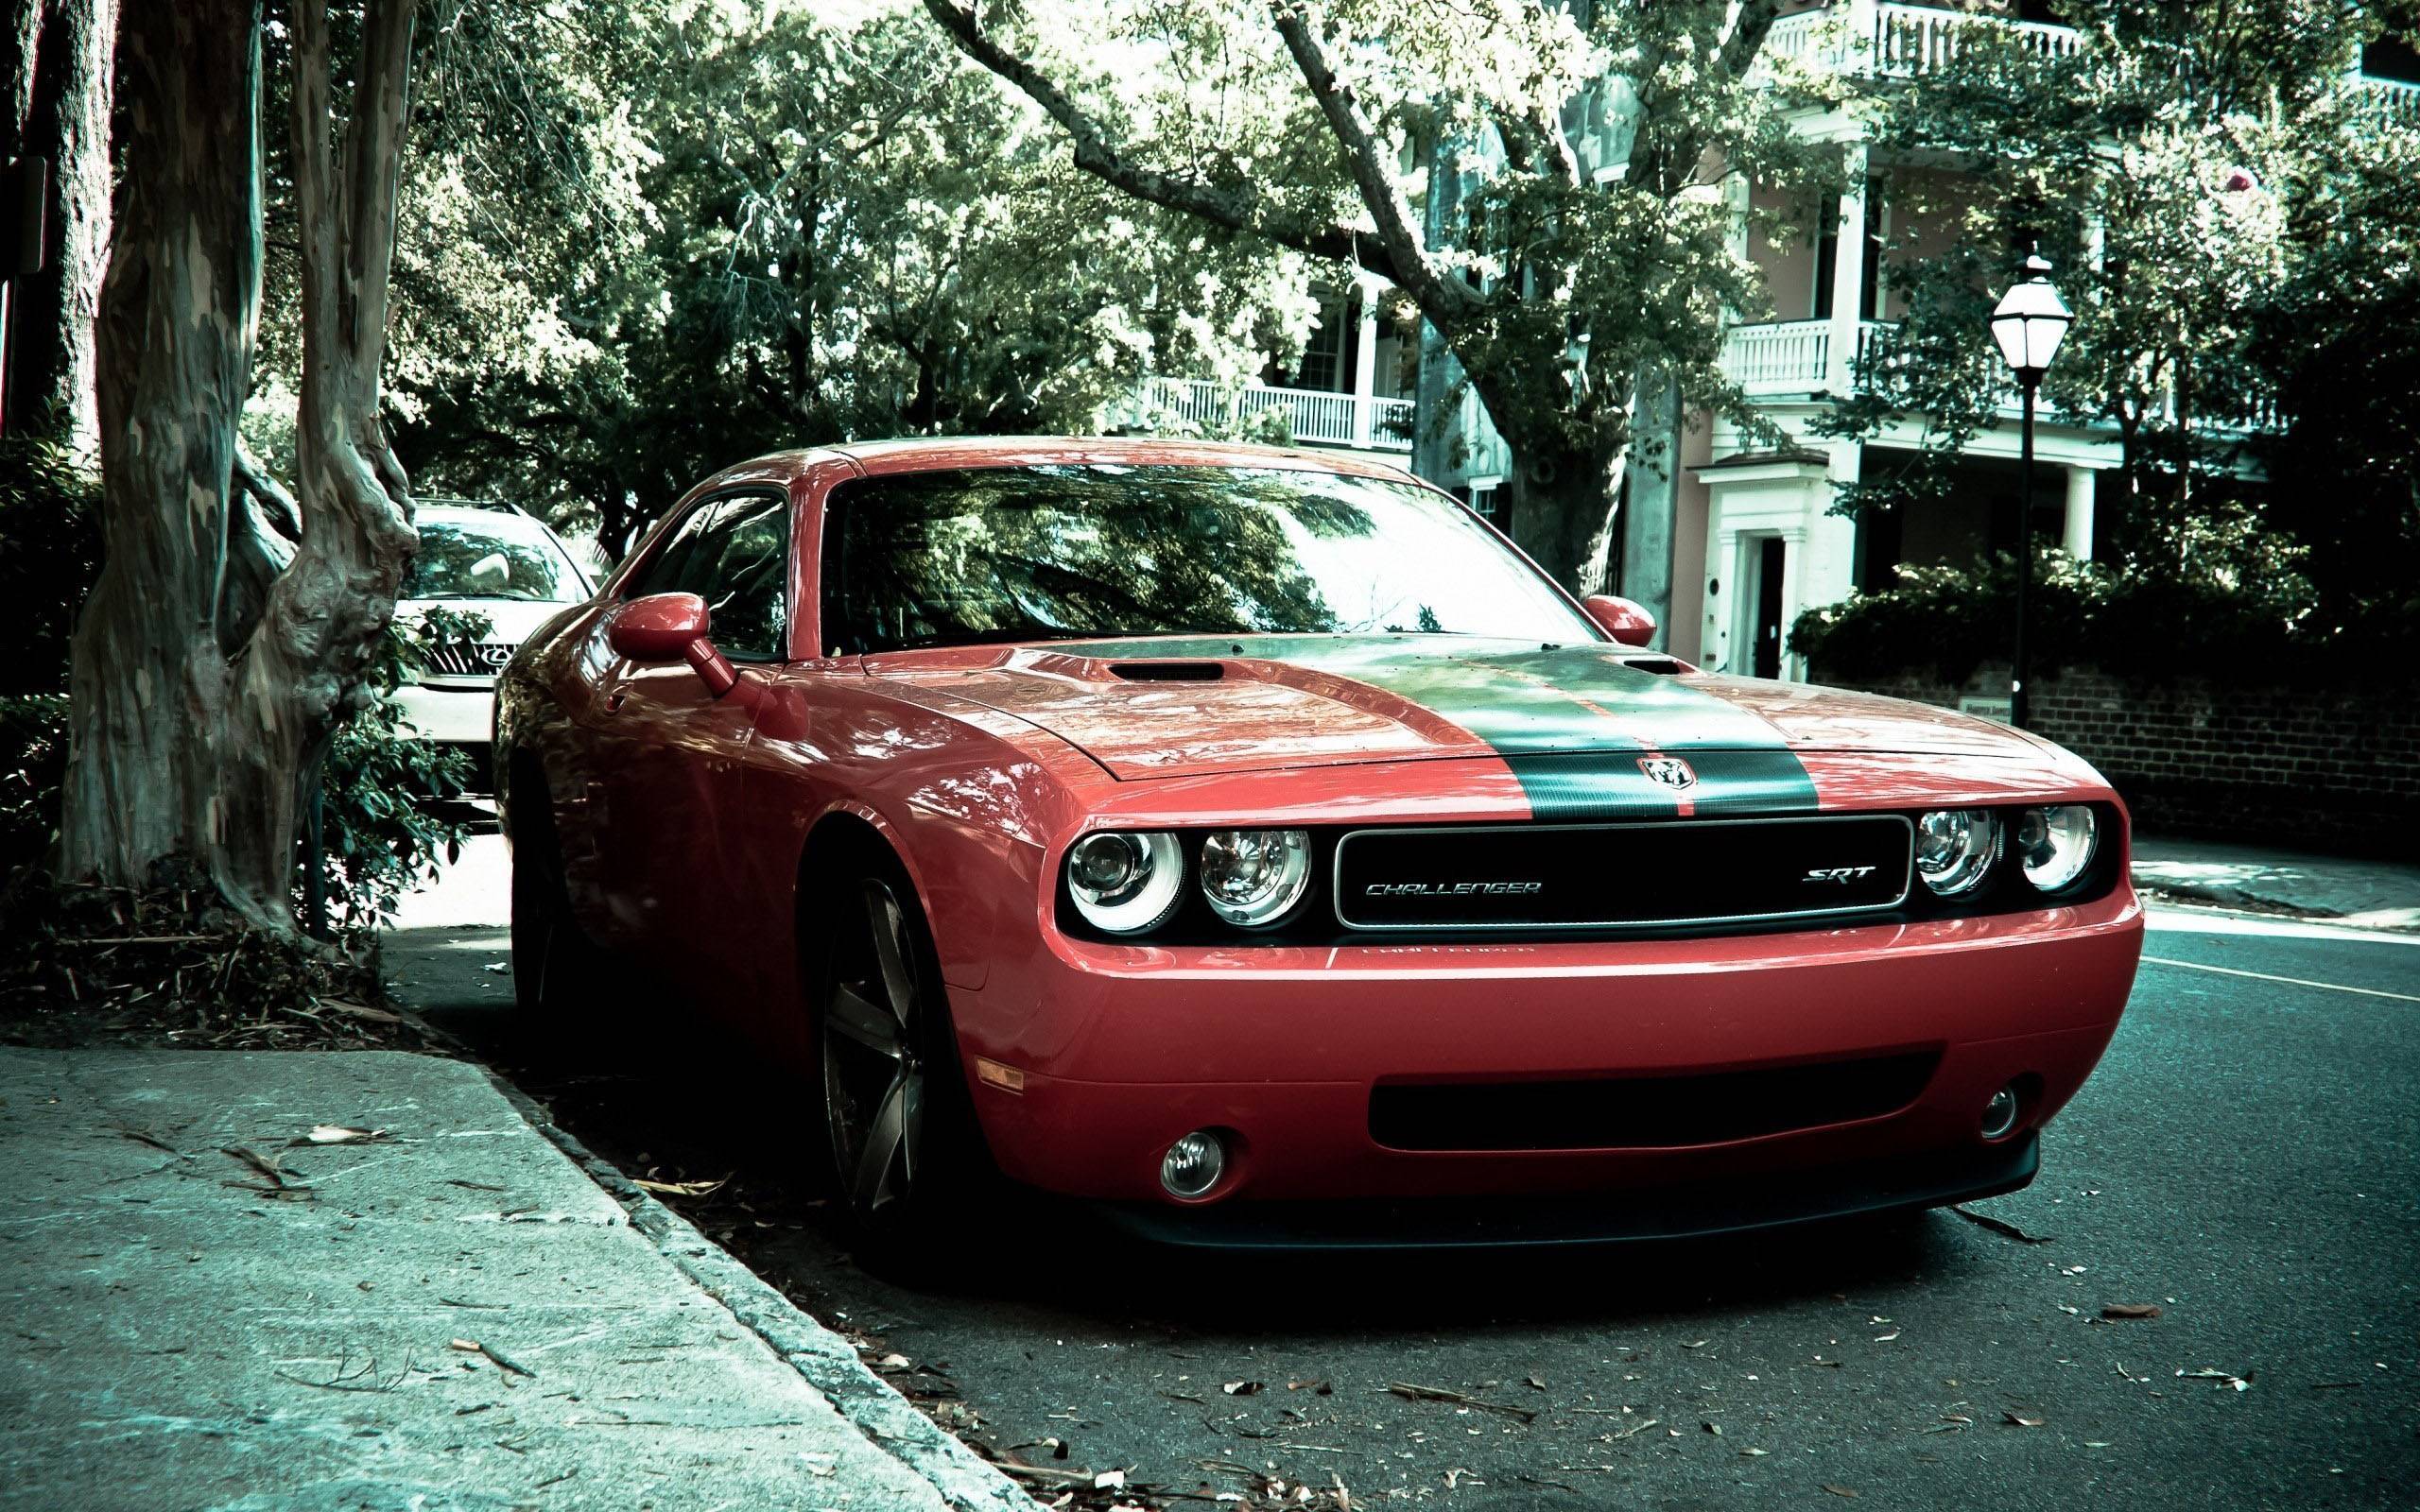 American Muscle Car Wallpaper For Mobile